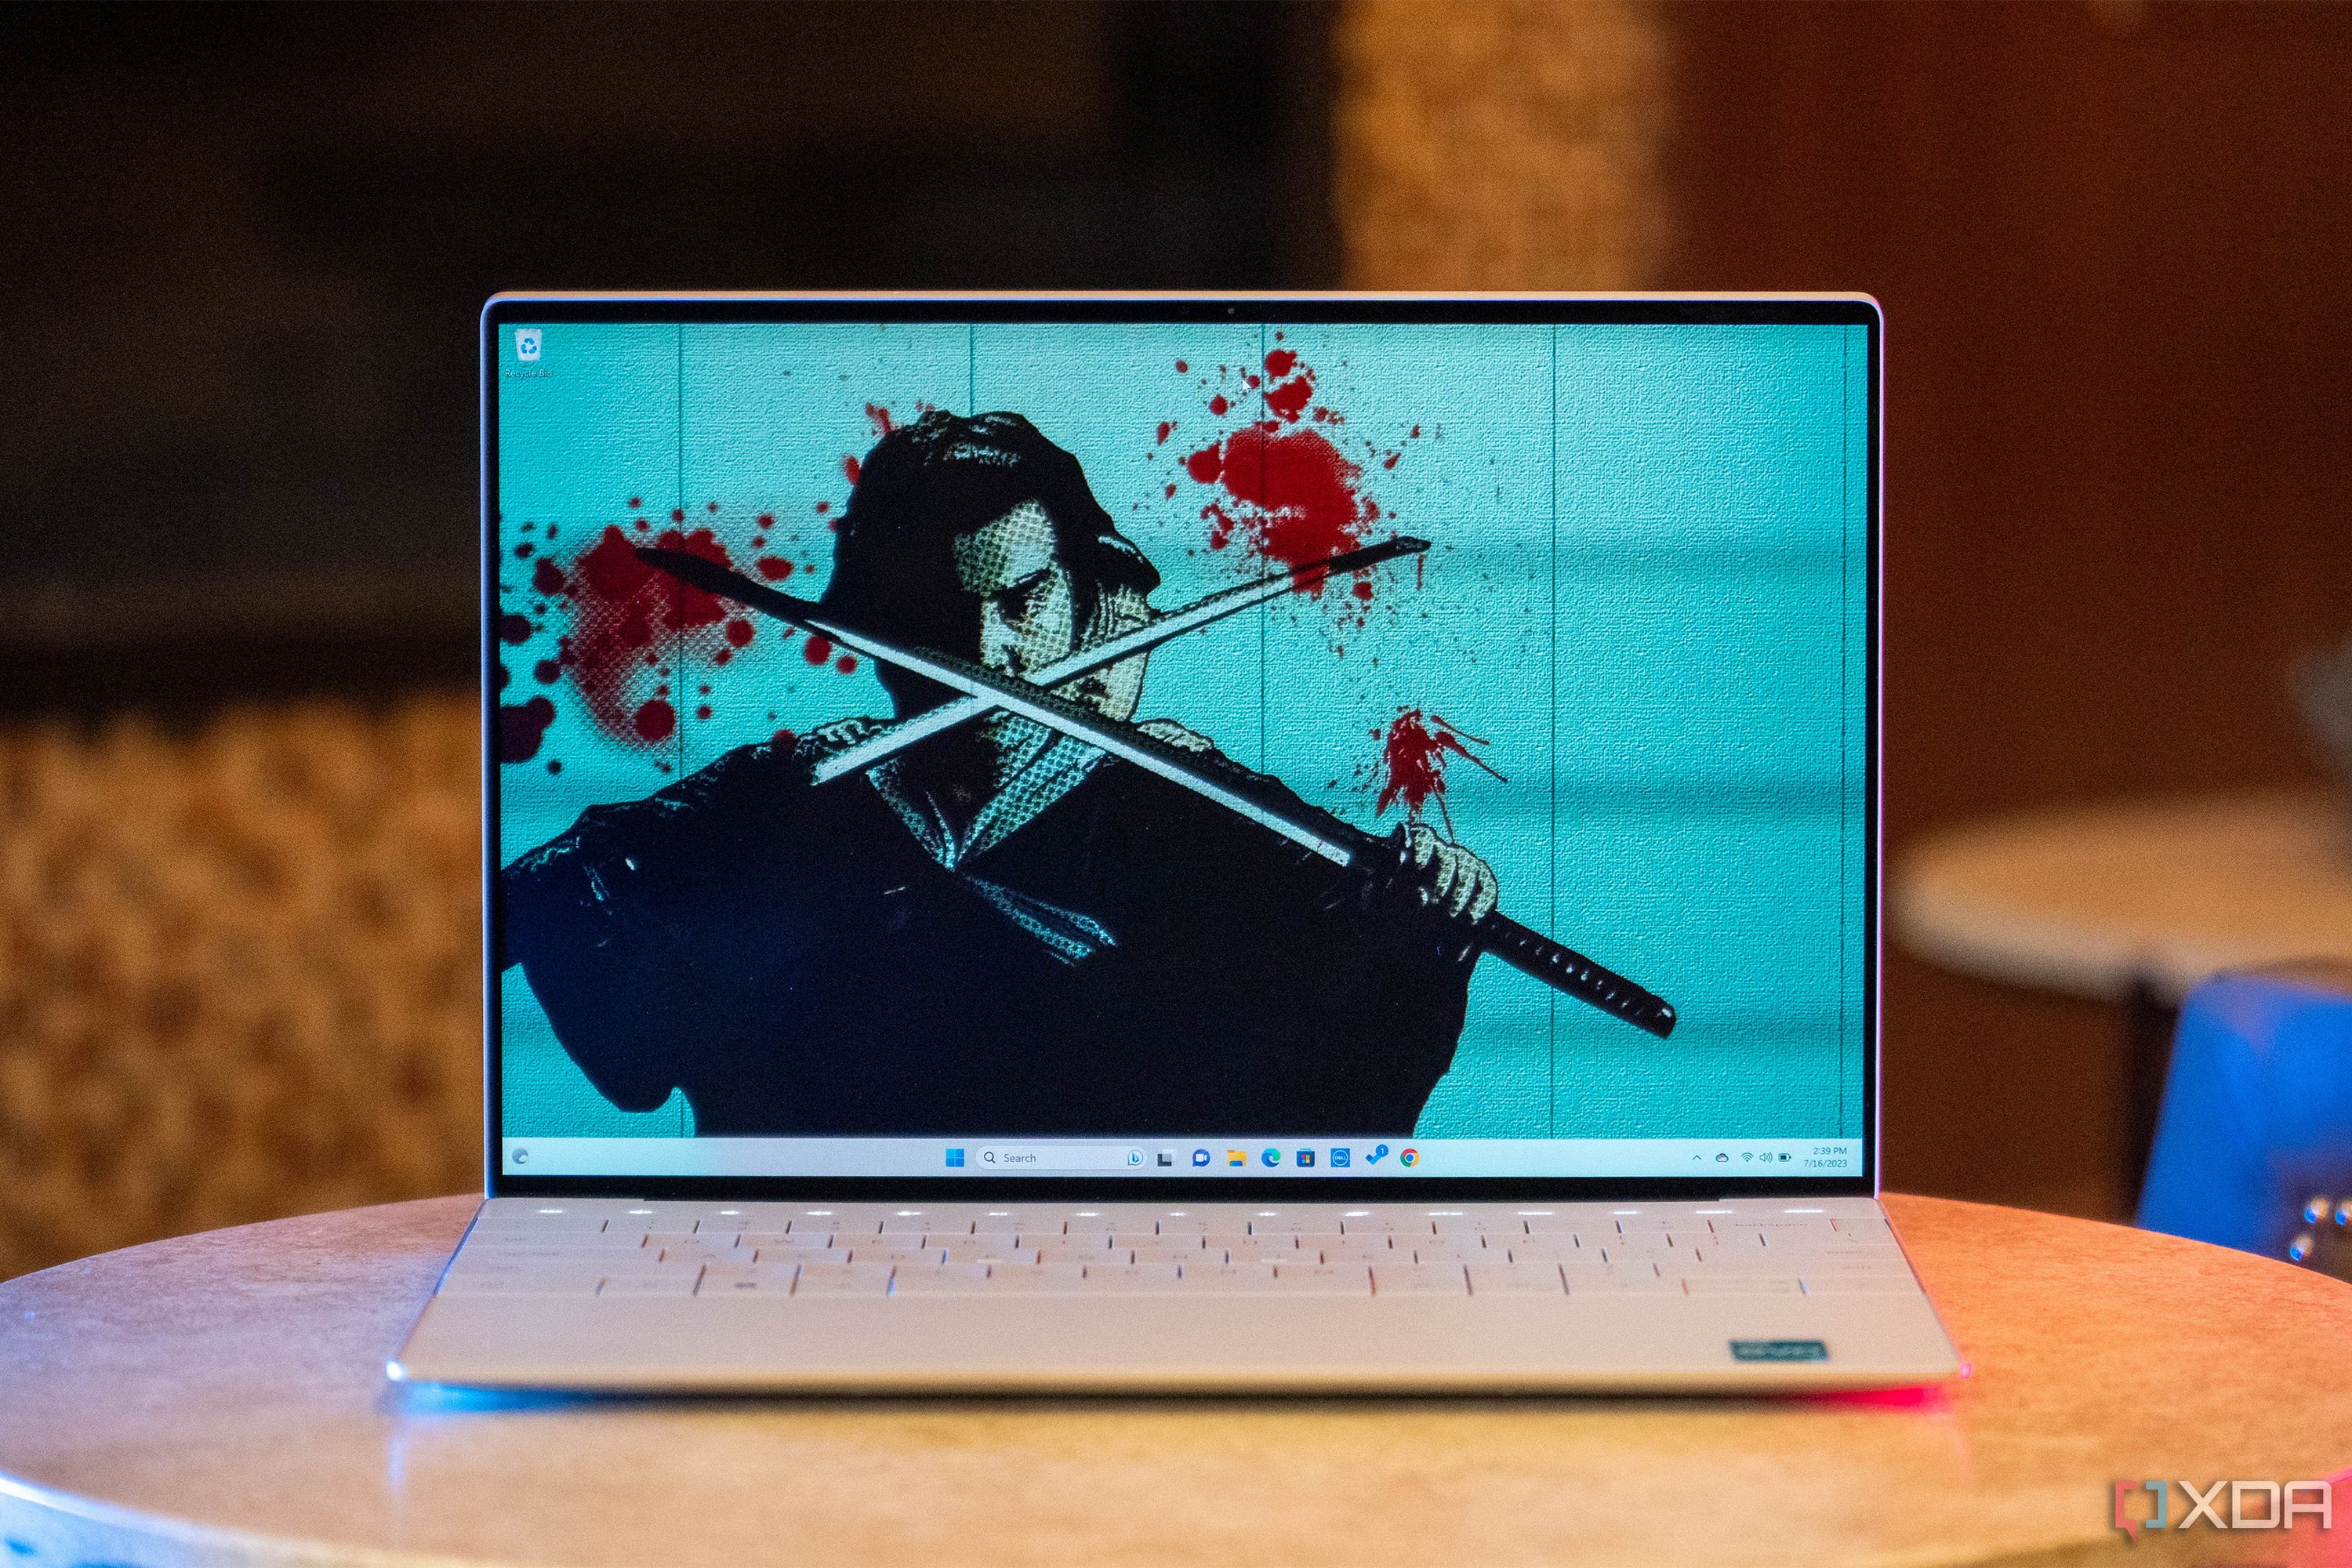 Dell XPS 13 Plus laptop with super cool Lone Wolf and Cub wallpaper